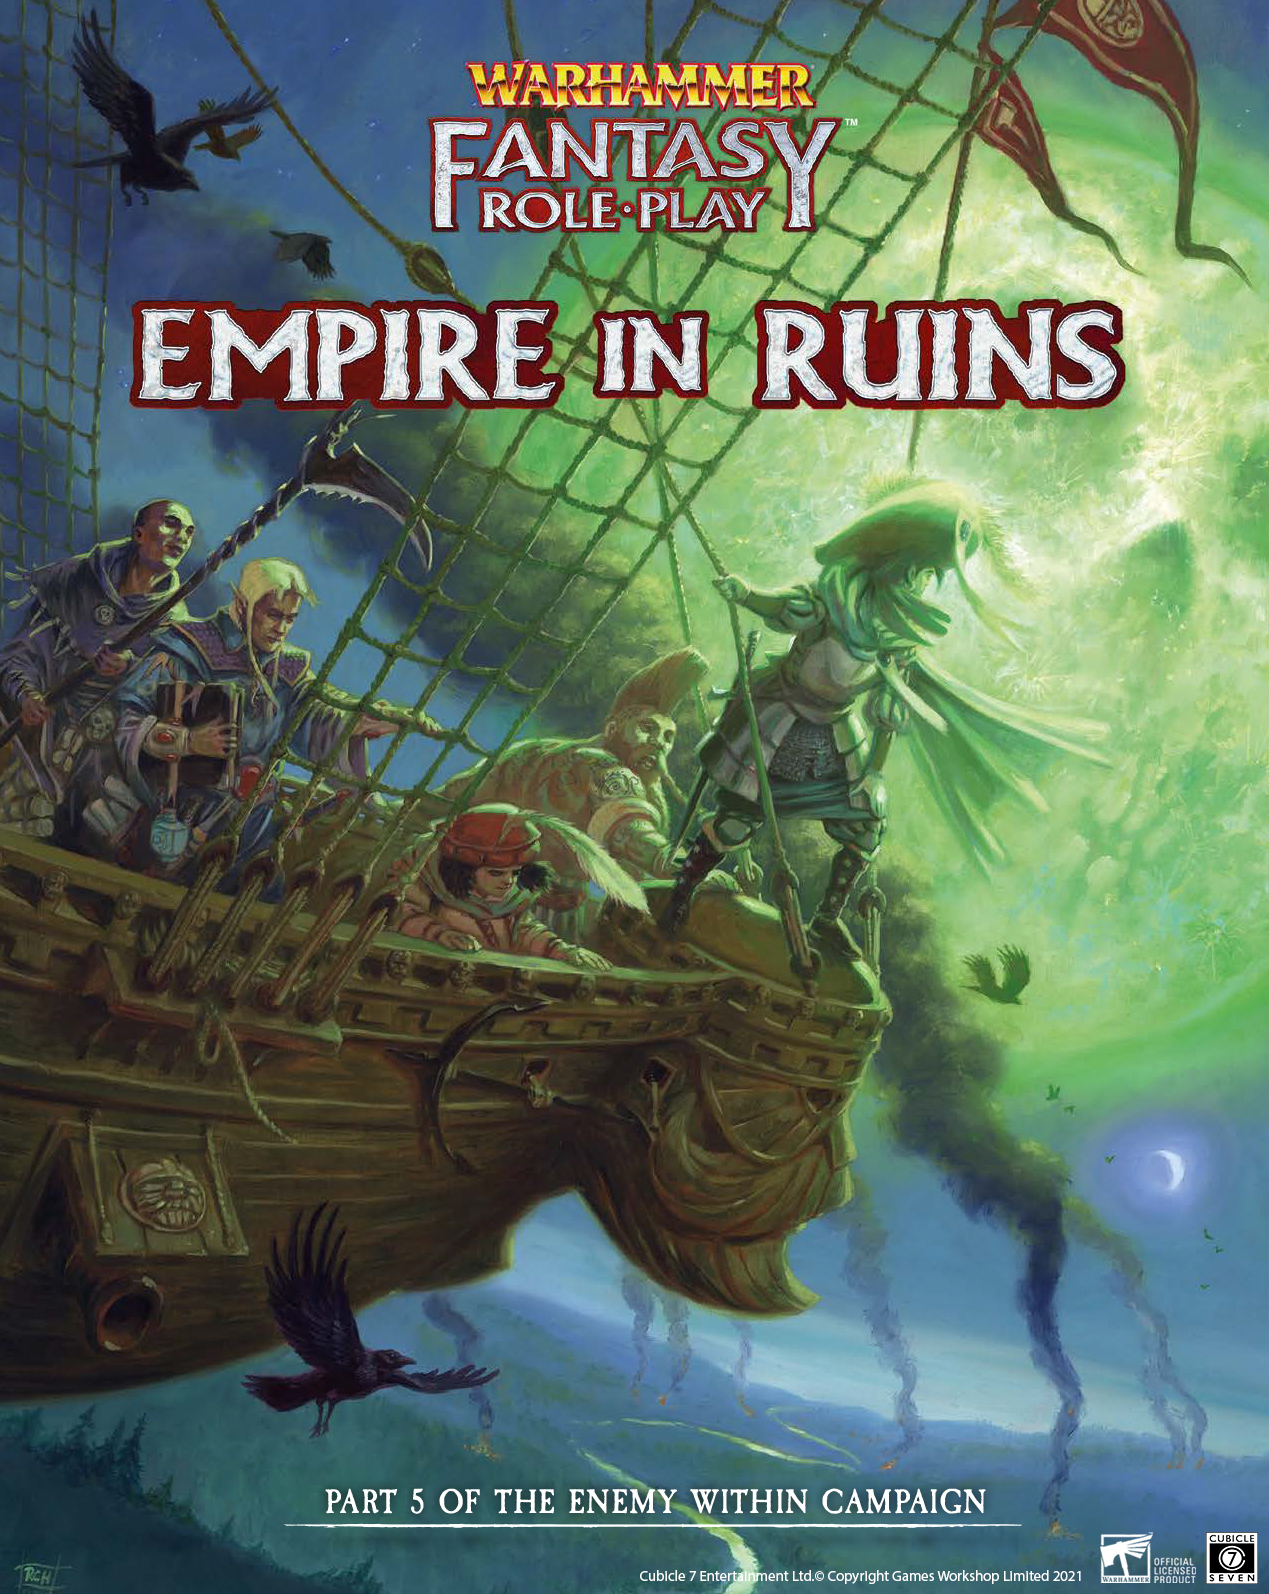 New Releases this week for WFRP & Soulbound!